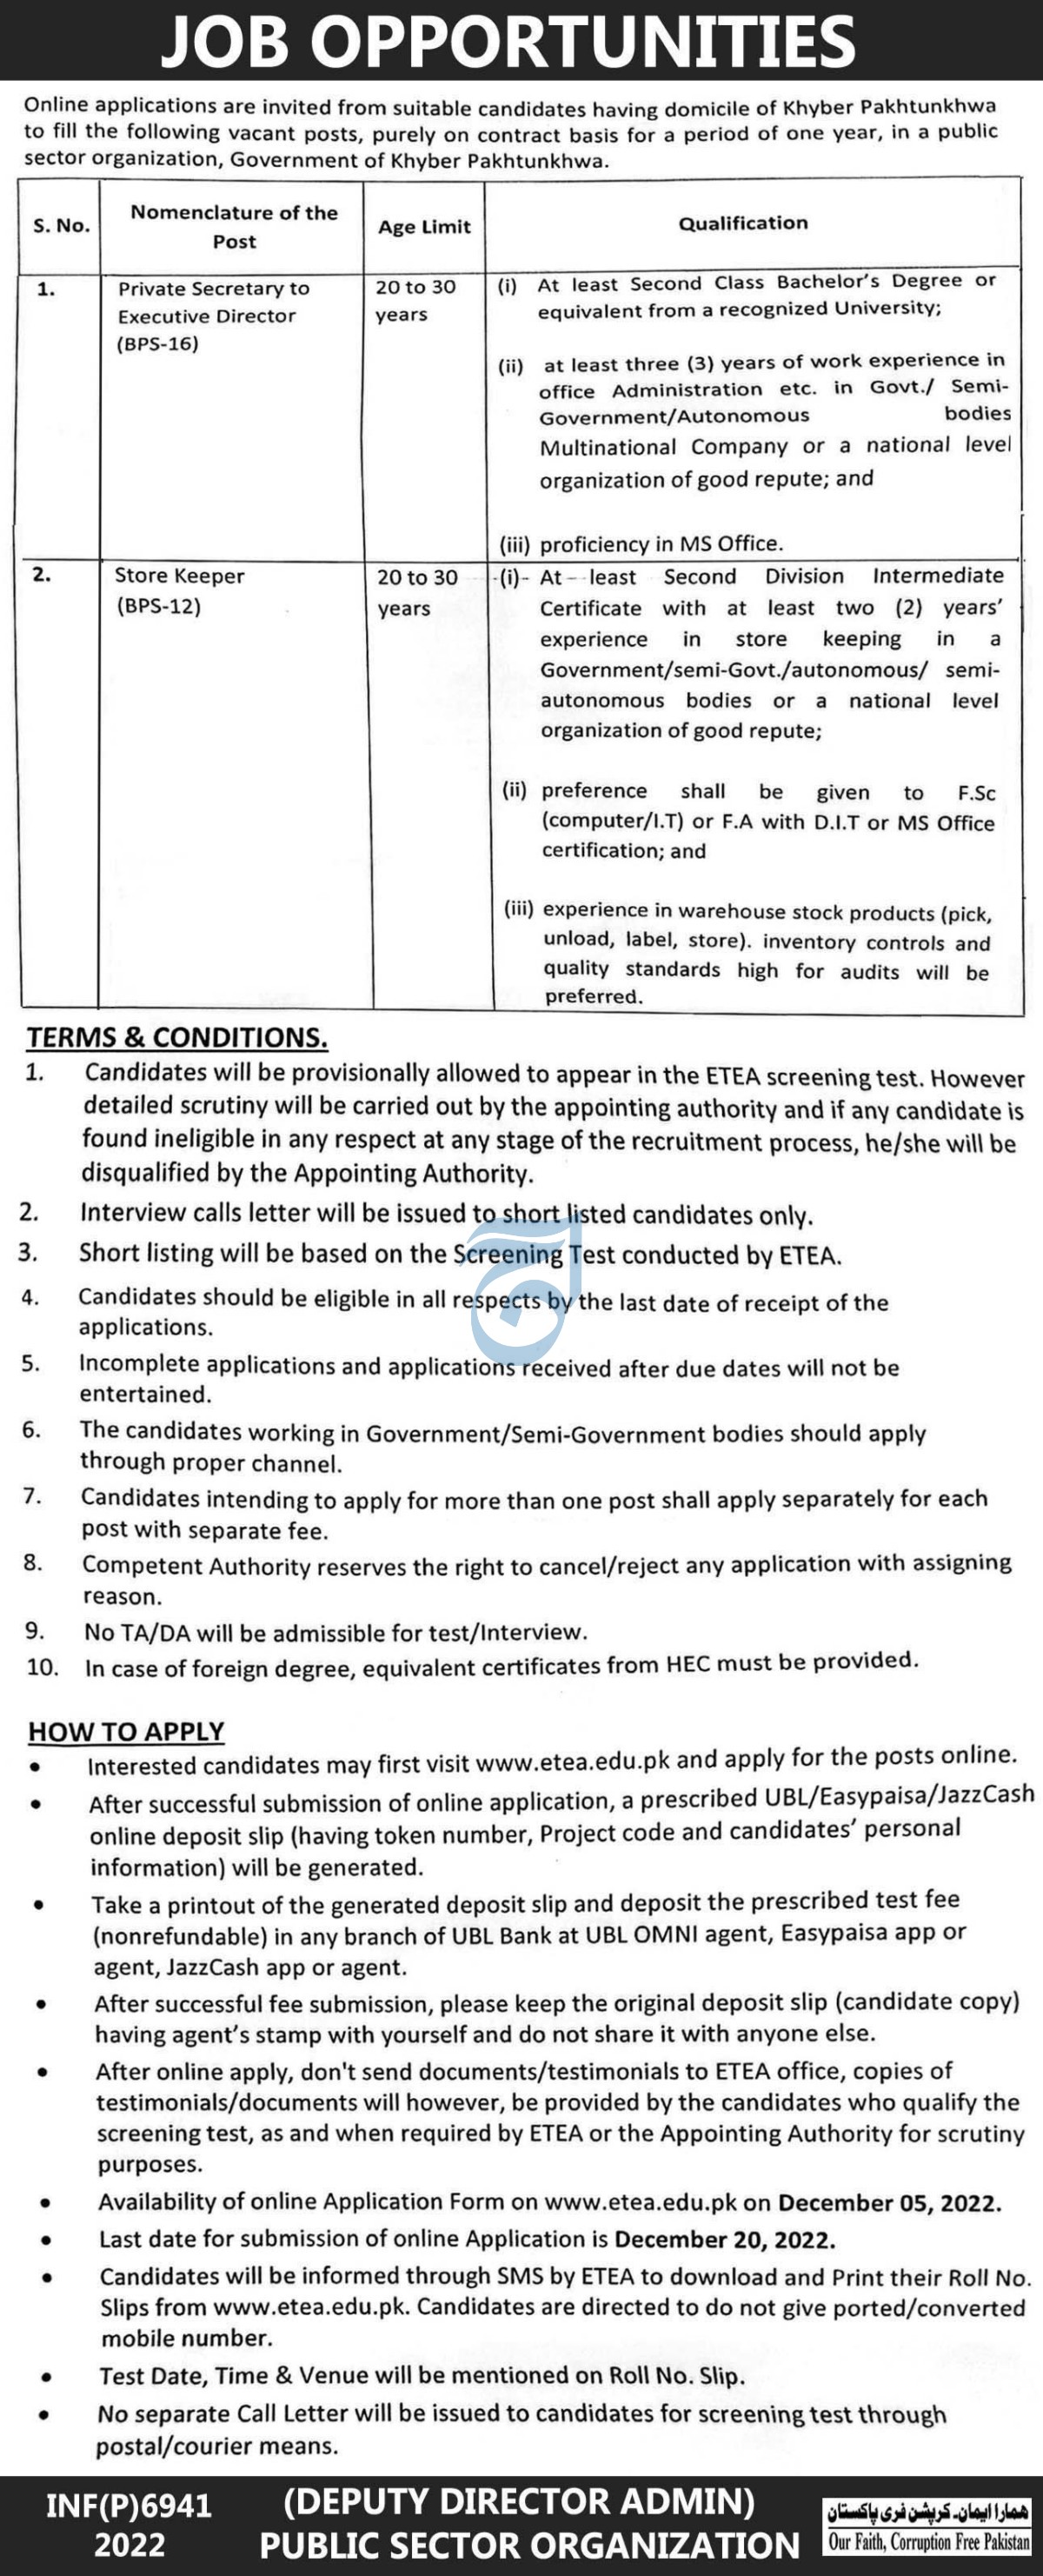 Latest Management jobs and others Government jobs in Public Sector Organization closing date is around December 20, 2022, see exact from ad. Read complete ad online via ETEA to know how to apply on latest Public Sector Organization job opportunities.